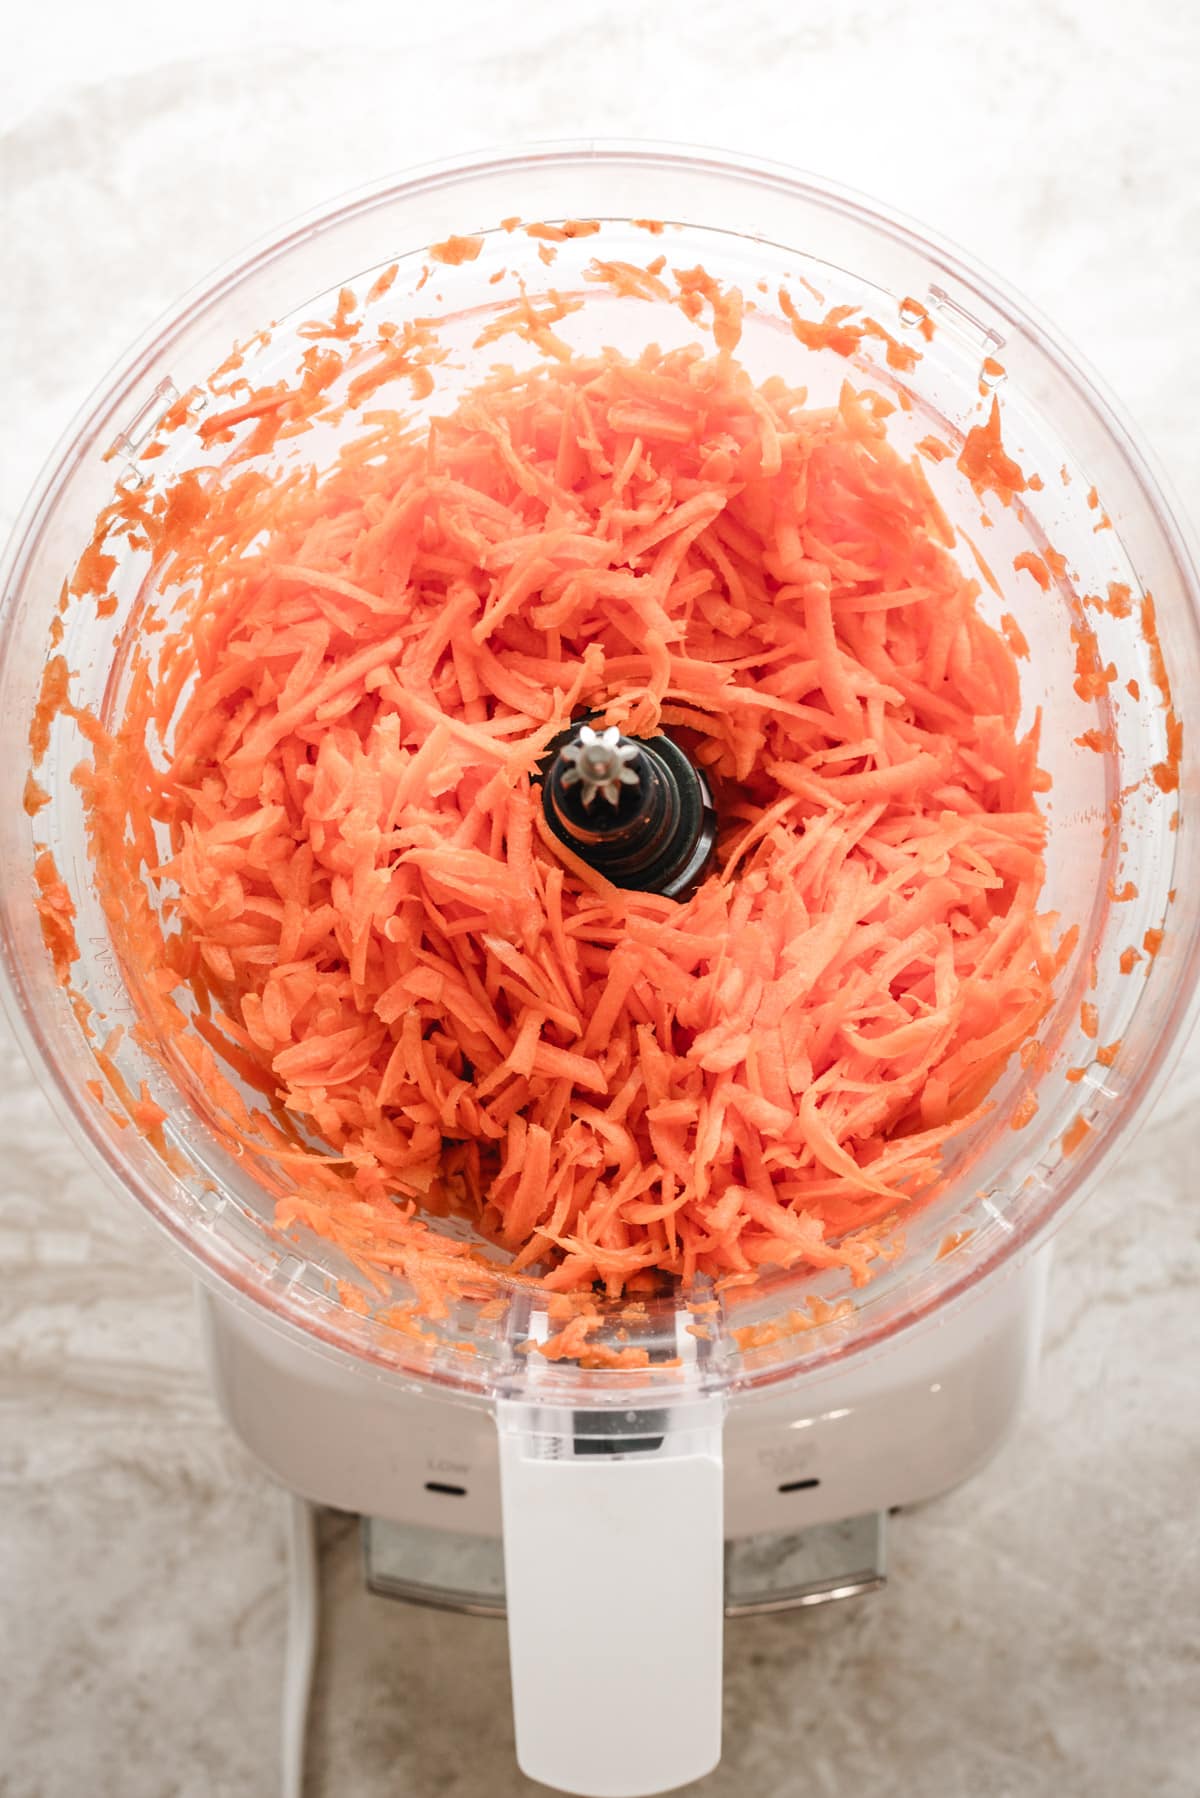 Shredded carrots in a food processor for carrot cake cupcakes